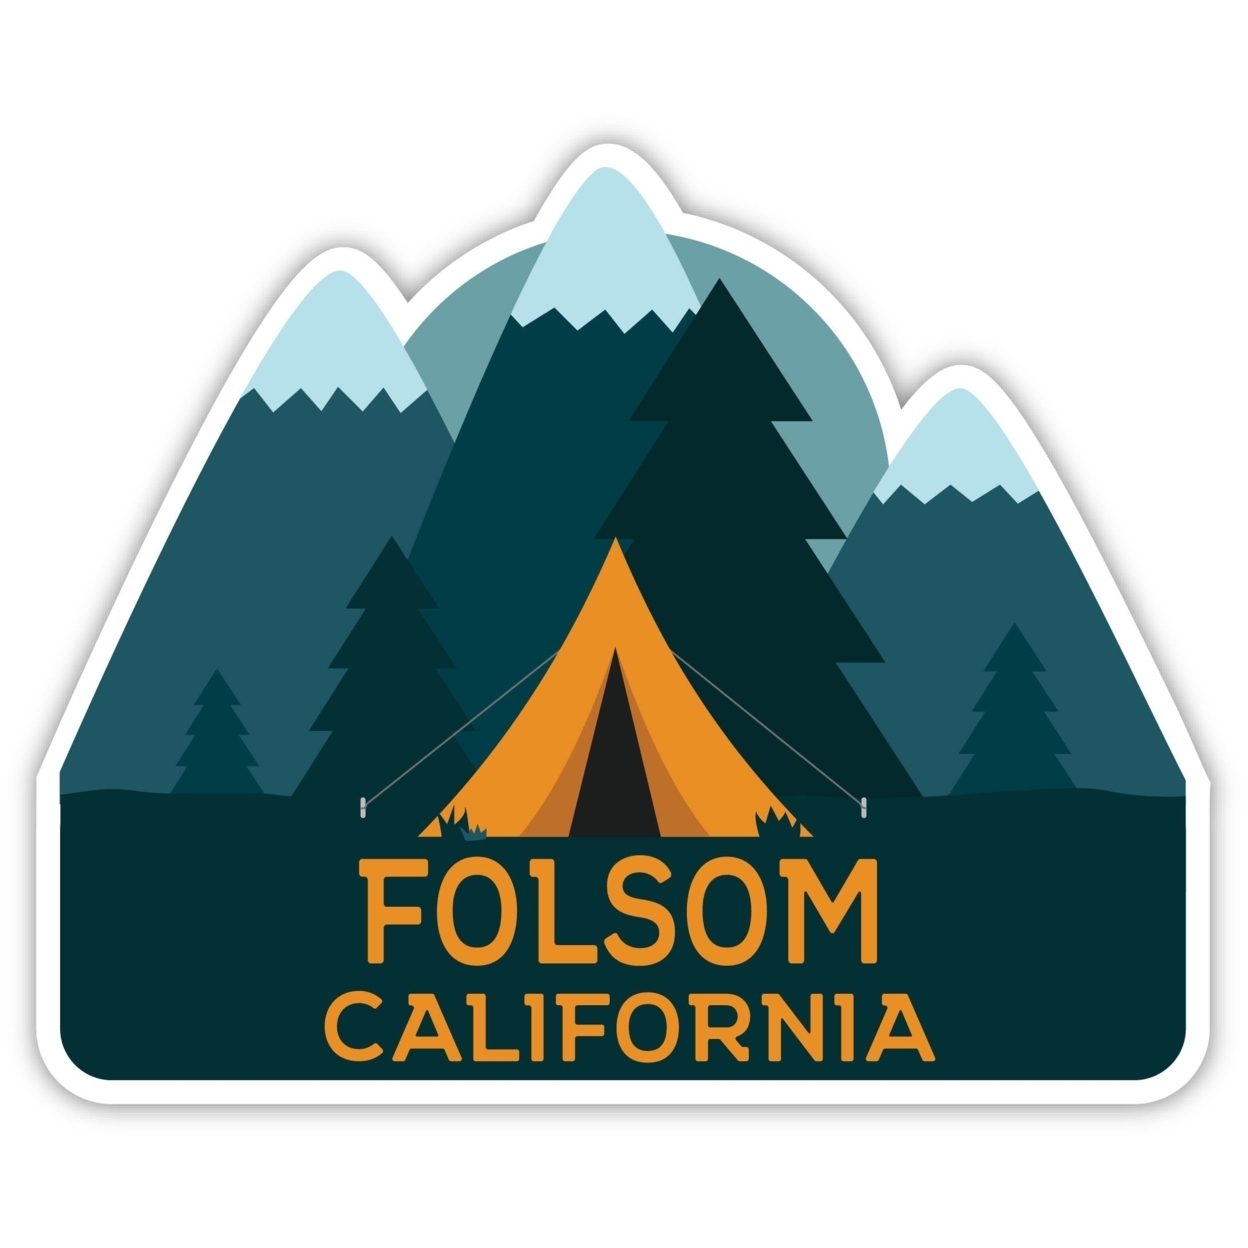 Folsom California Souvenir Decorative Stickers (Choose Theme And Size) - 4-Pack, 2-Inch, Bear